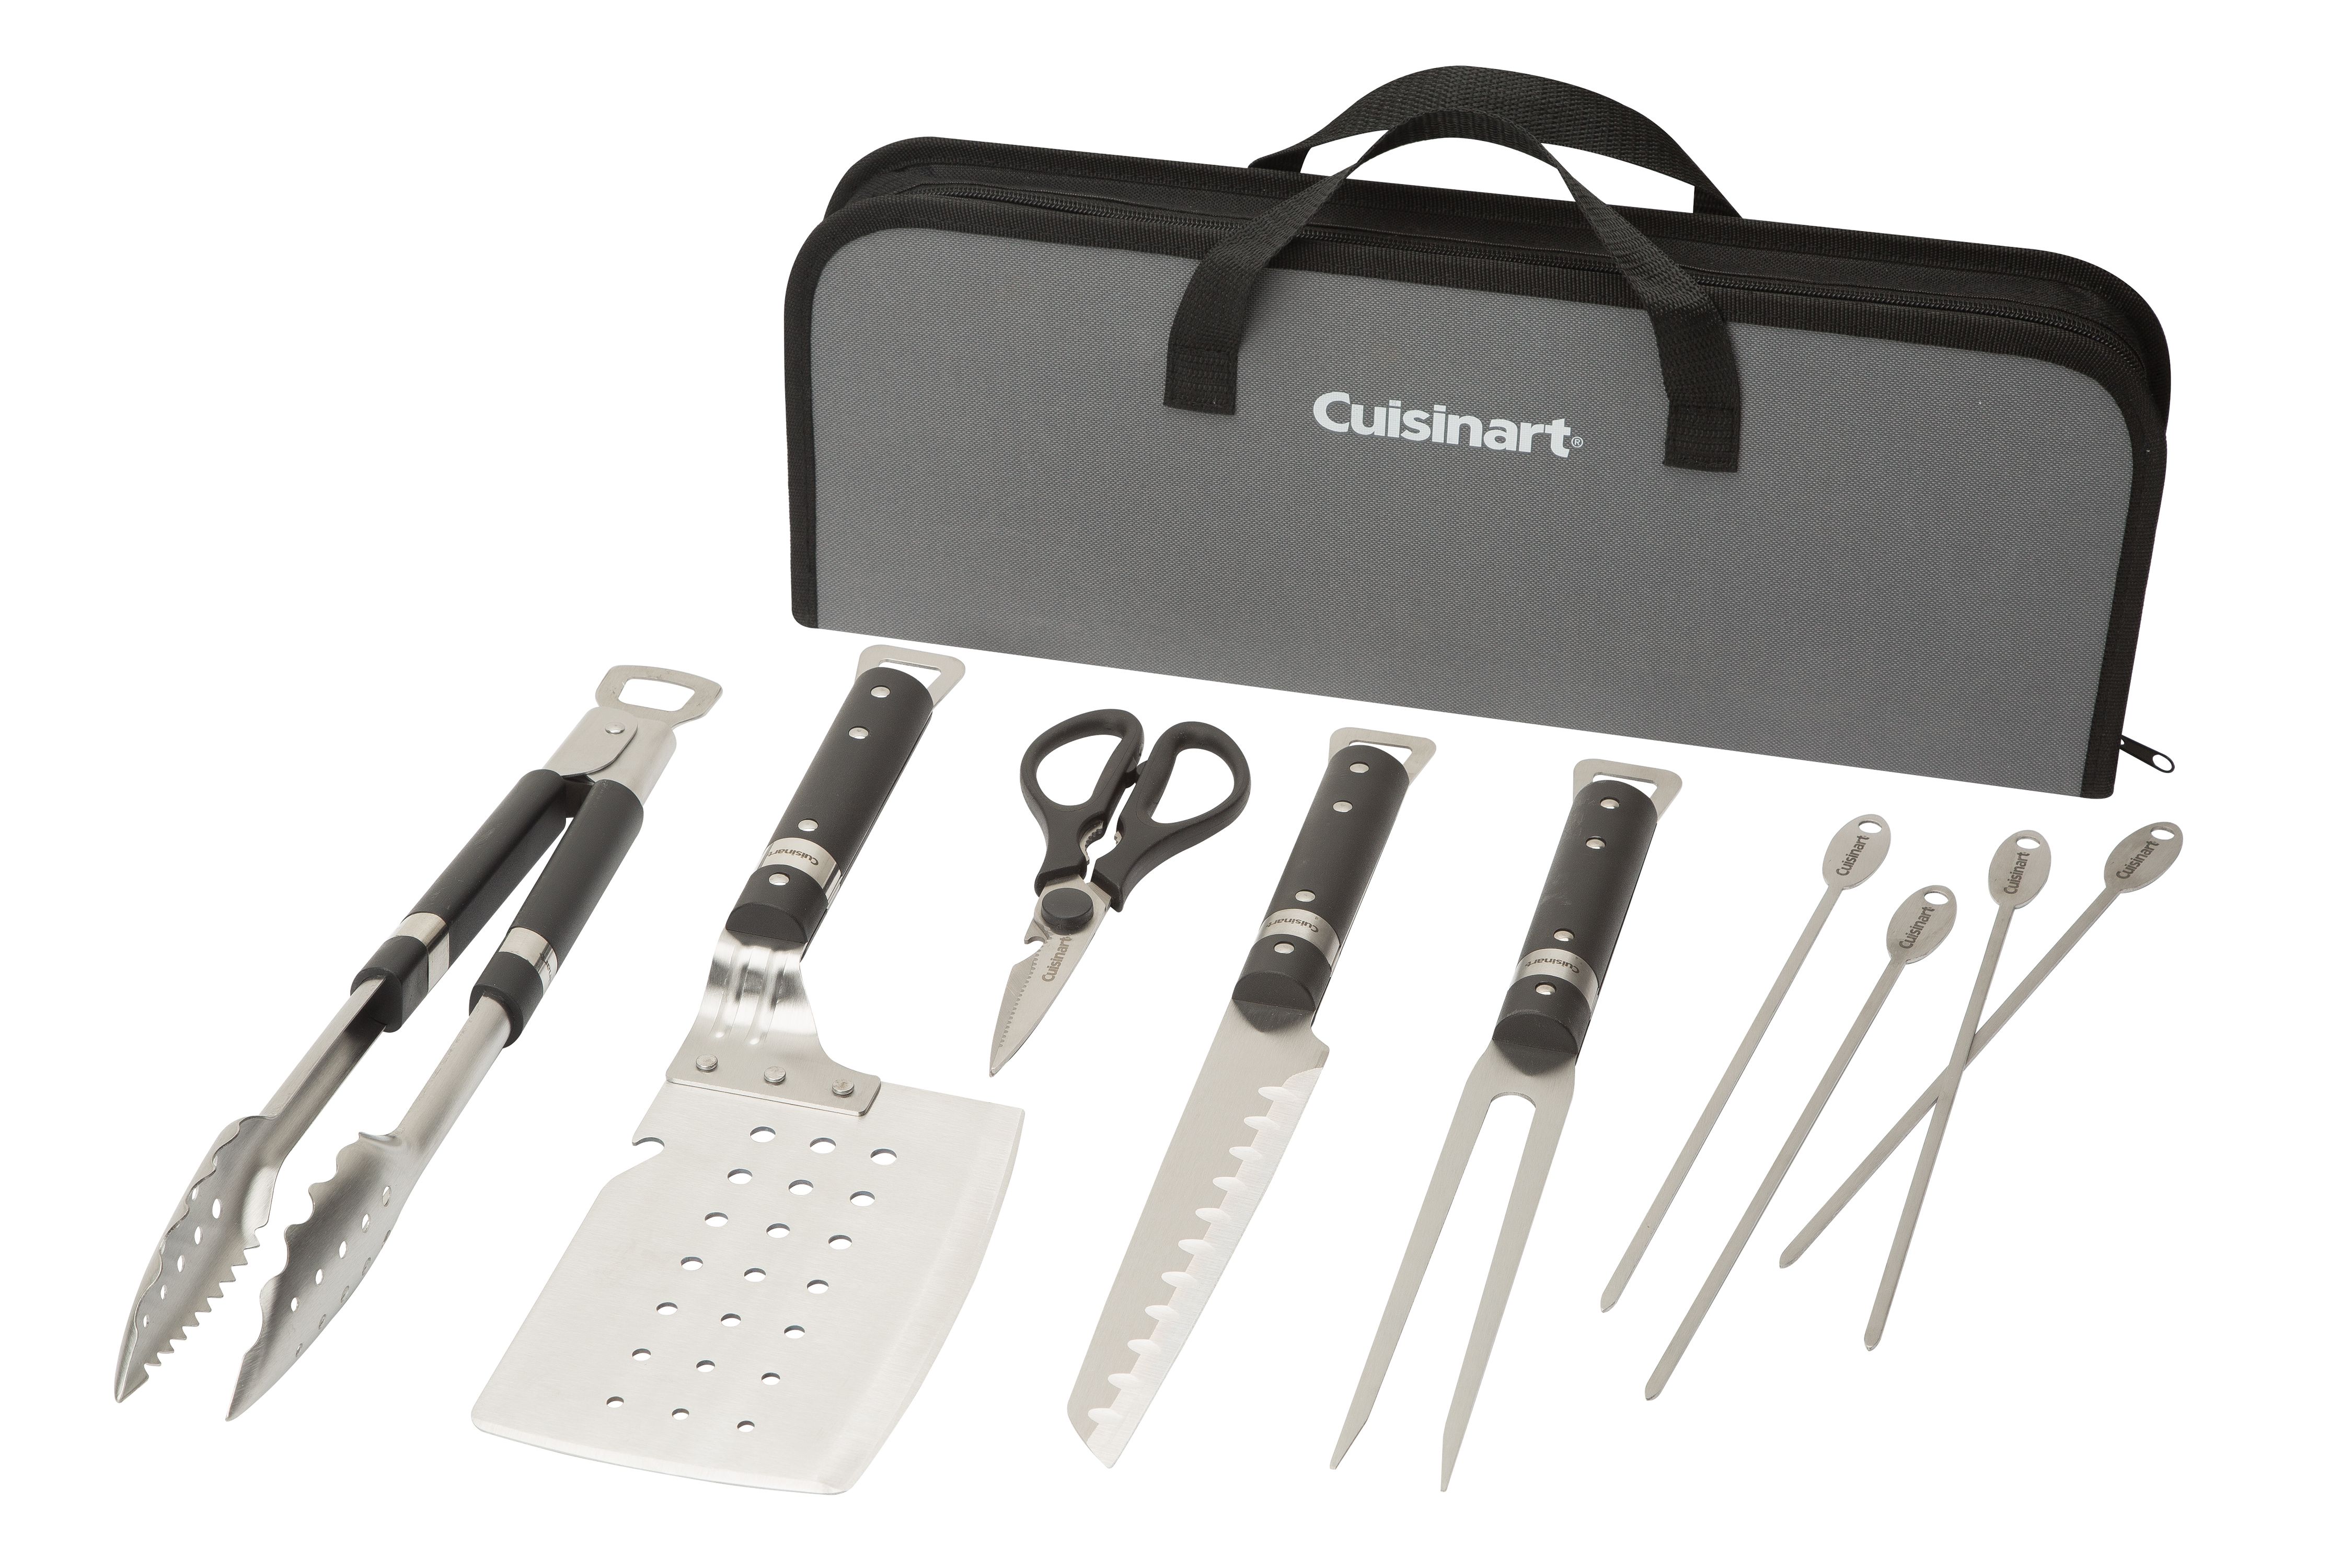 Cuisinart Chefs Classic 10 Piece Stainless Steel Grill Set - Spatula, Tongs, Fork, Knife, Shears, And 4 Skewers. - image 1 of 19